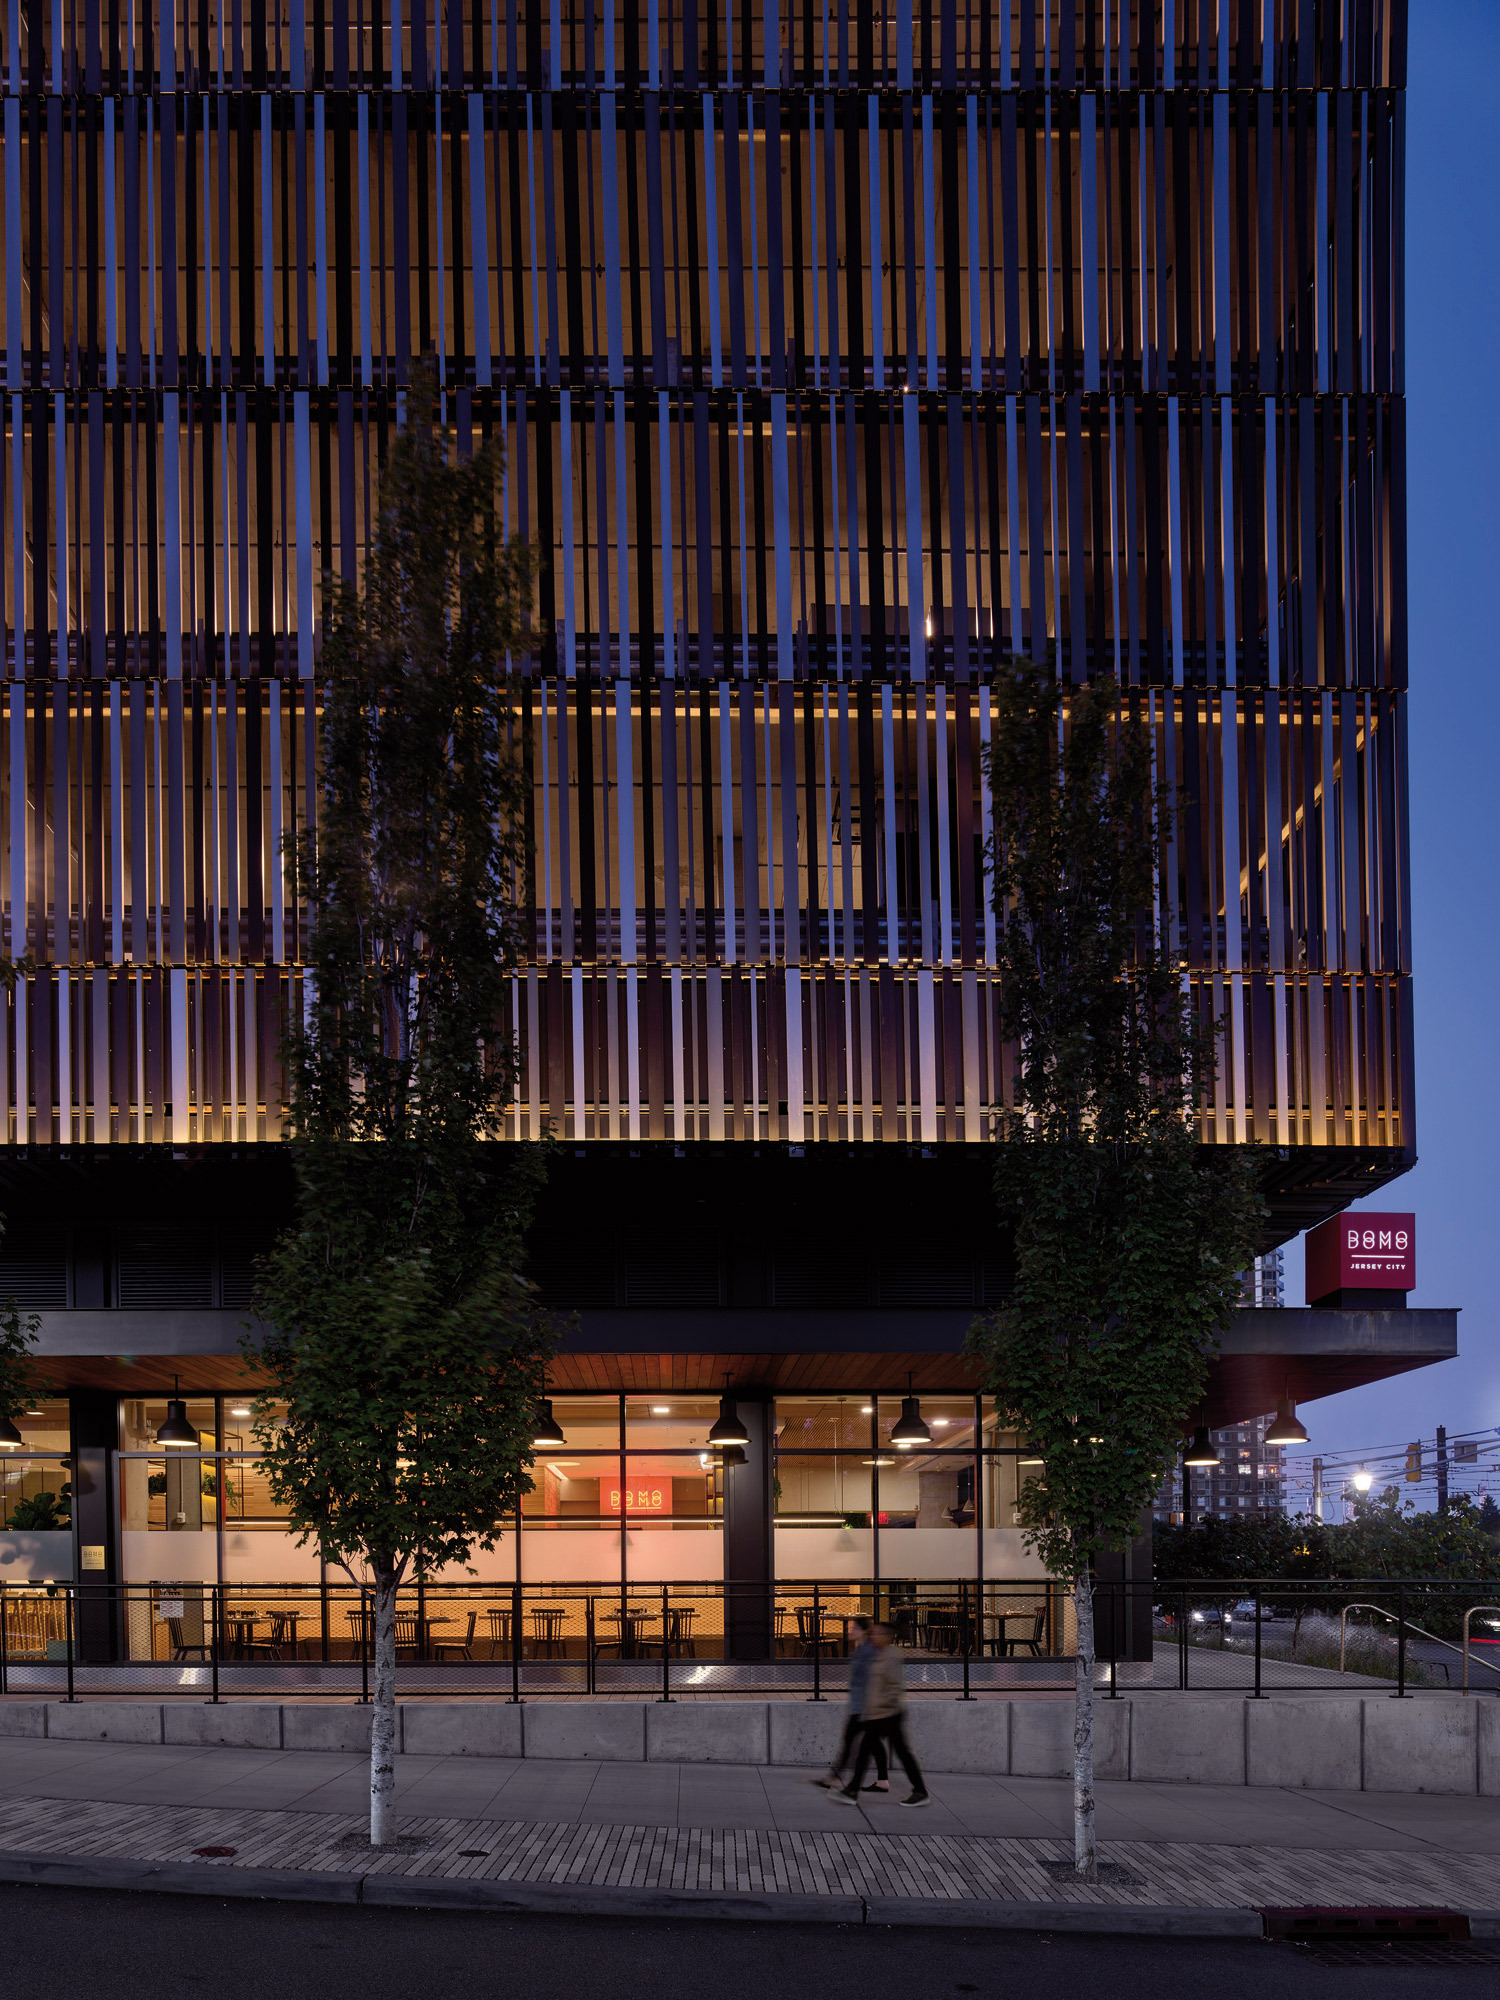 Modern architectural building at dusk showcasing vertical timber louvers for sun shading, with the ground floor featuring transparent glass windows offering a glimpse into the illuminated interior space. A pedestrian walks by, emphasizing the blend of urban environment and innovative design.